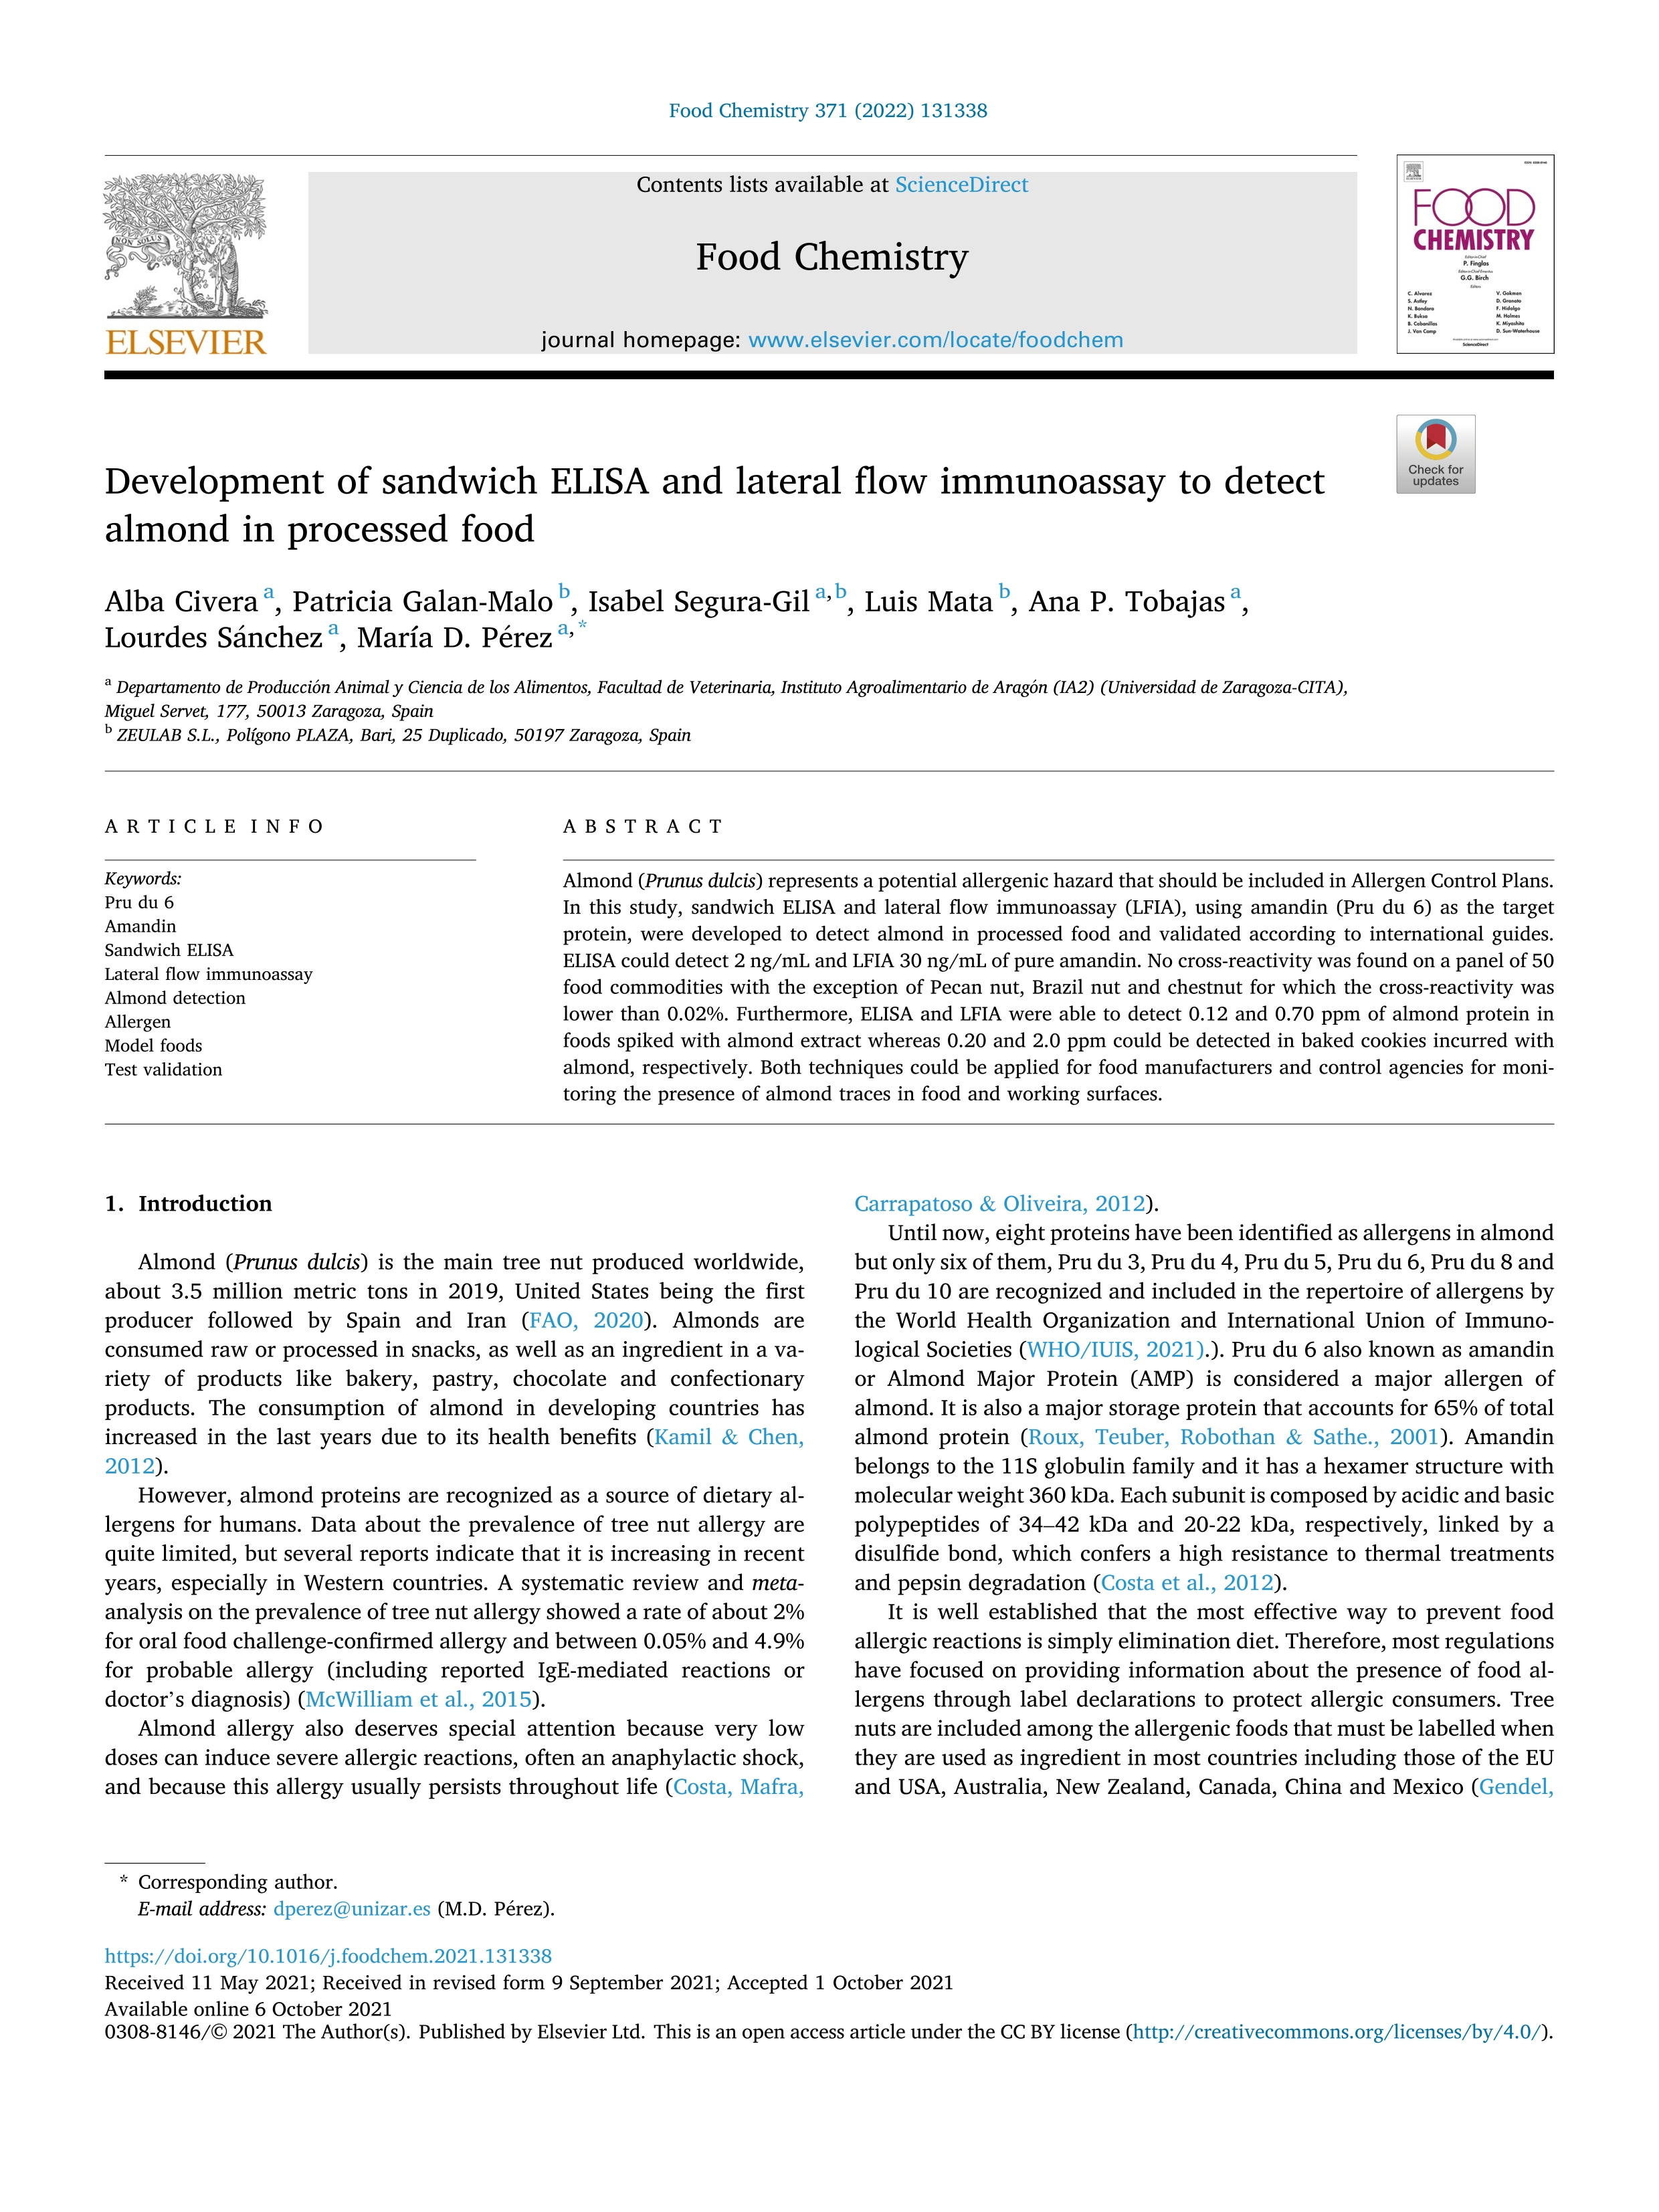 Development of sandwich ELISA and lateral flow immunoassay to detect almond in processed food